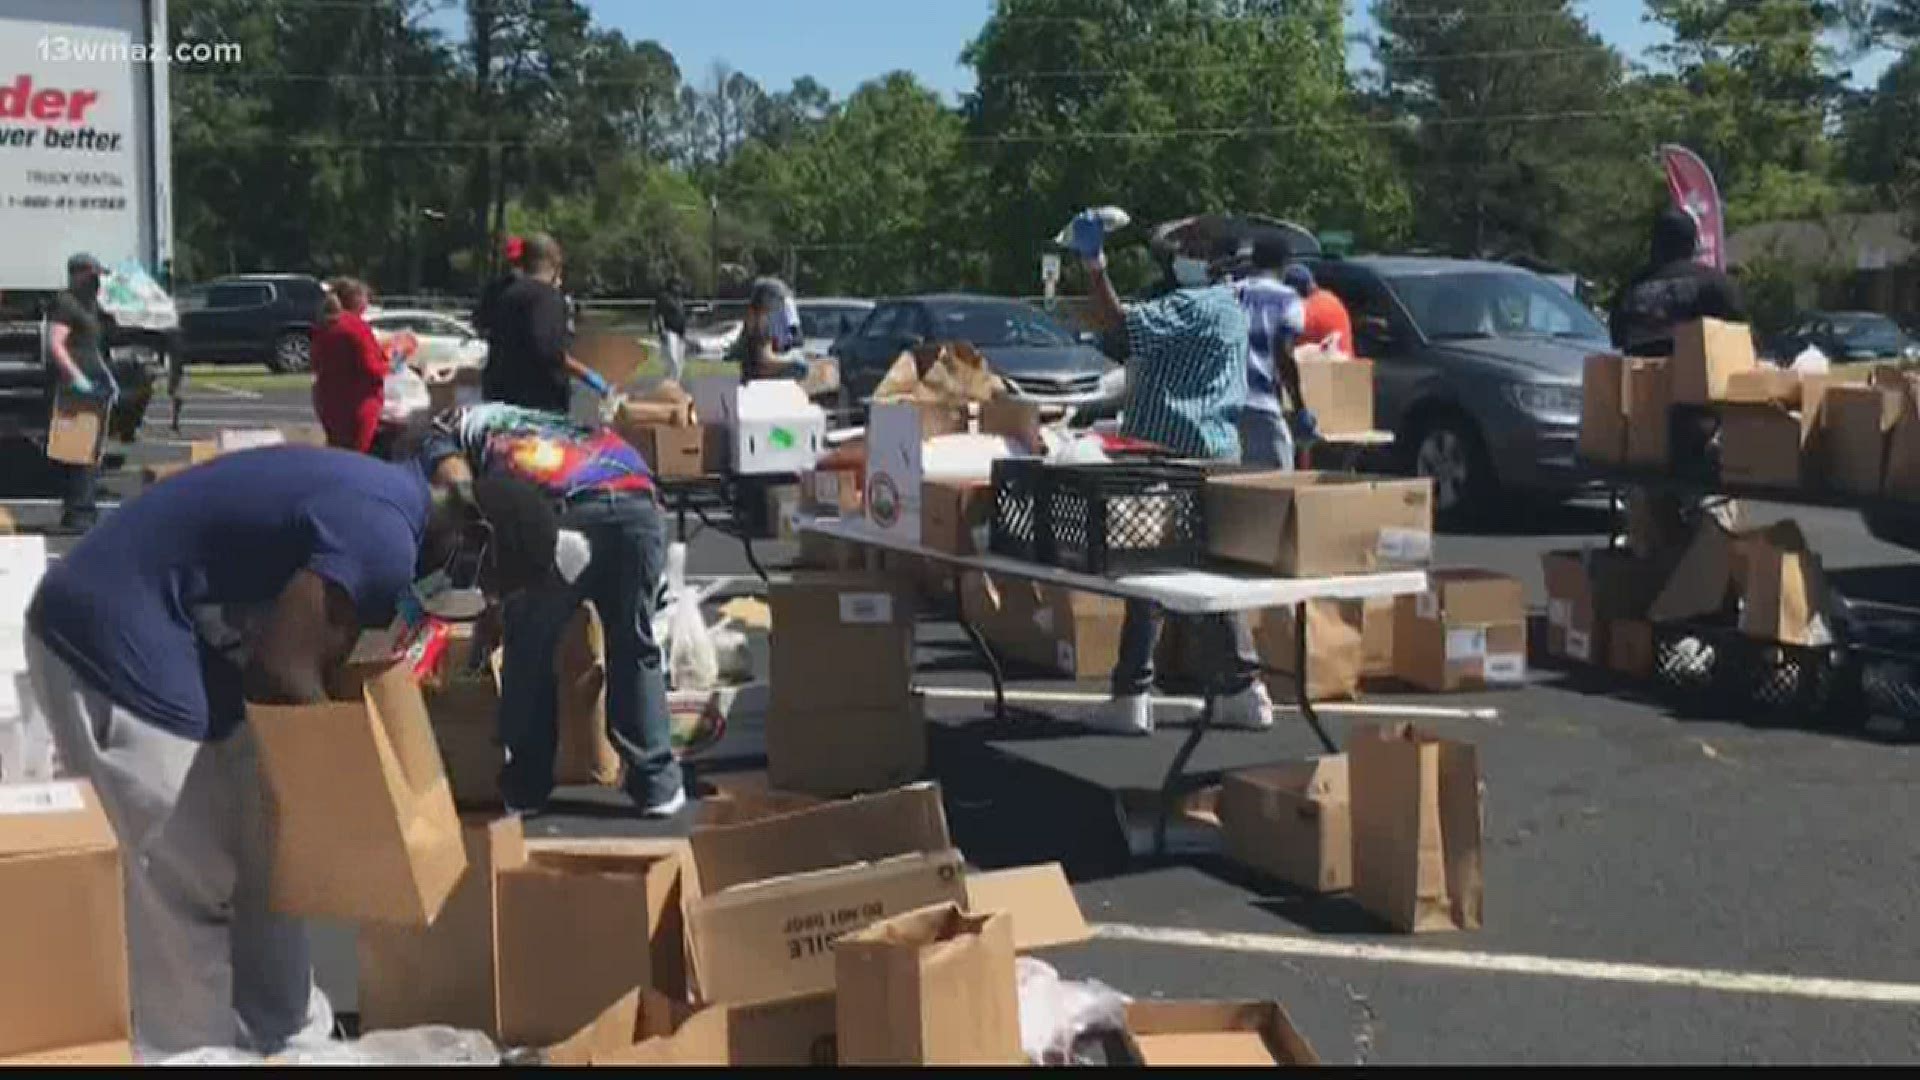 5 Macon churches helped those who need it most. In partnership with Middle Georgia Community Food Bank and United Way, they passed out 10,000 boxes of food Saturday.